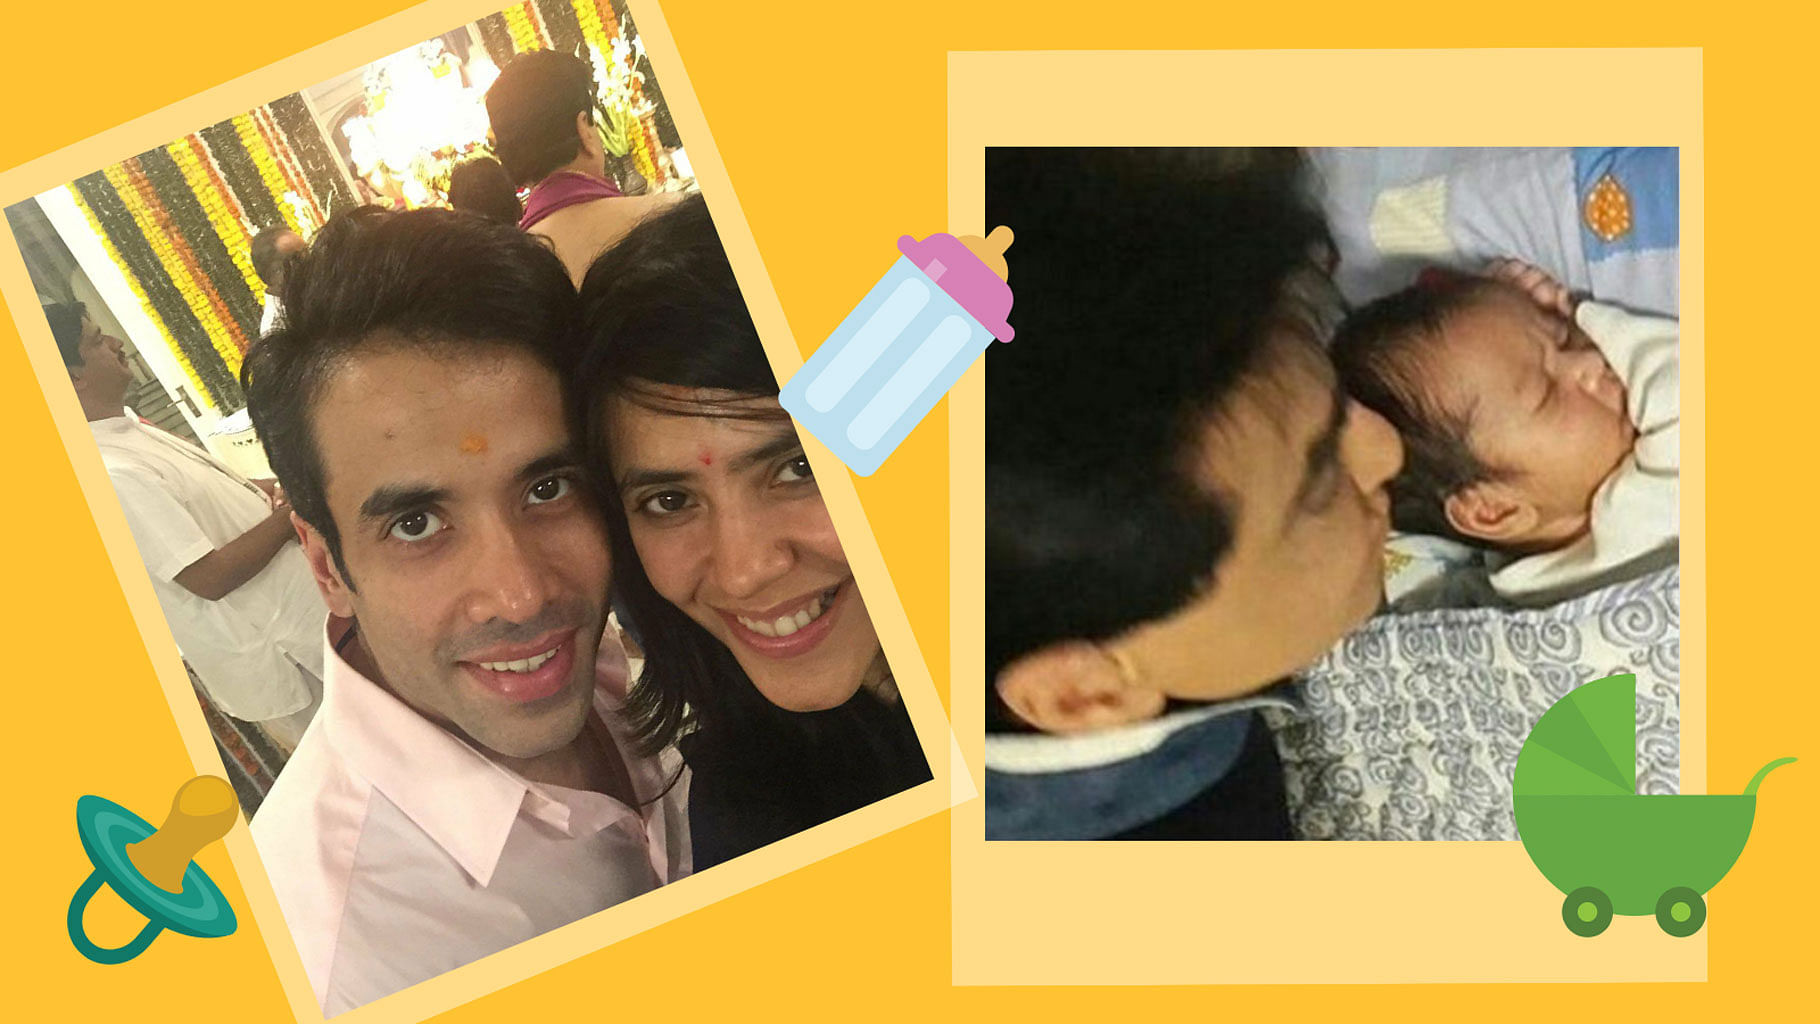 Tusshar Kapoor is Bollywood’s new dad (Photo courtesy: Twitter)